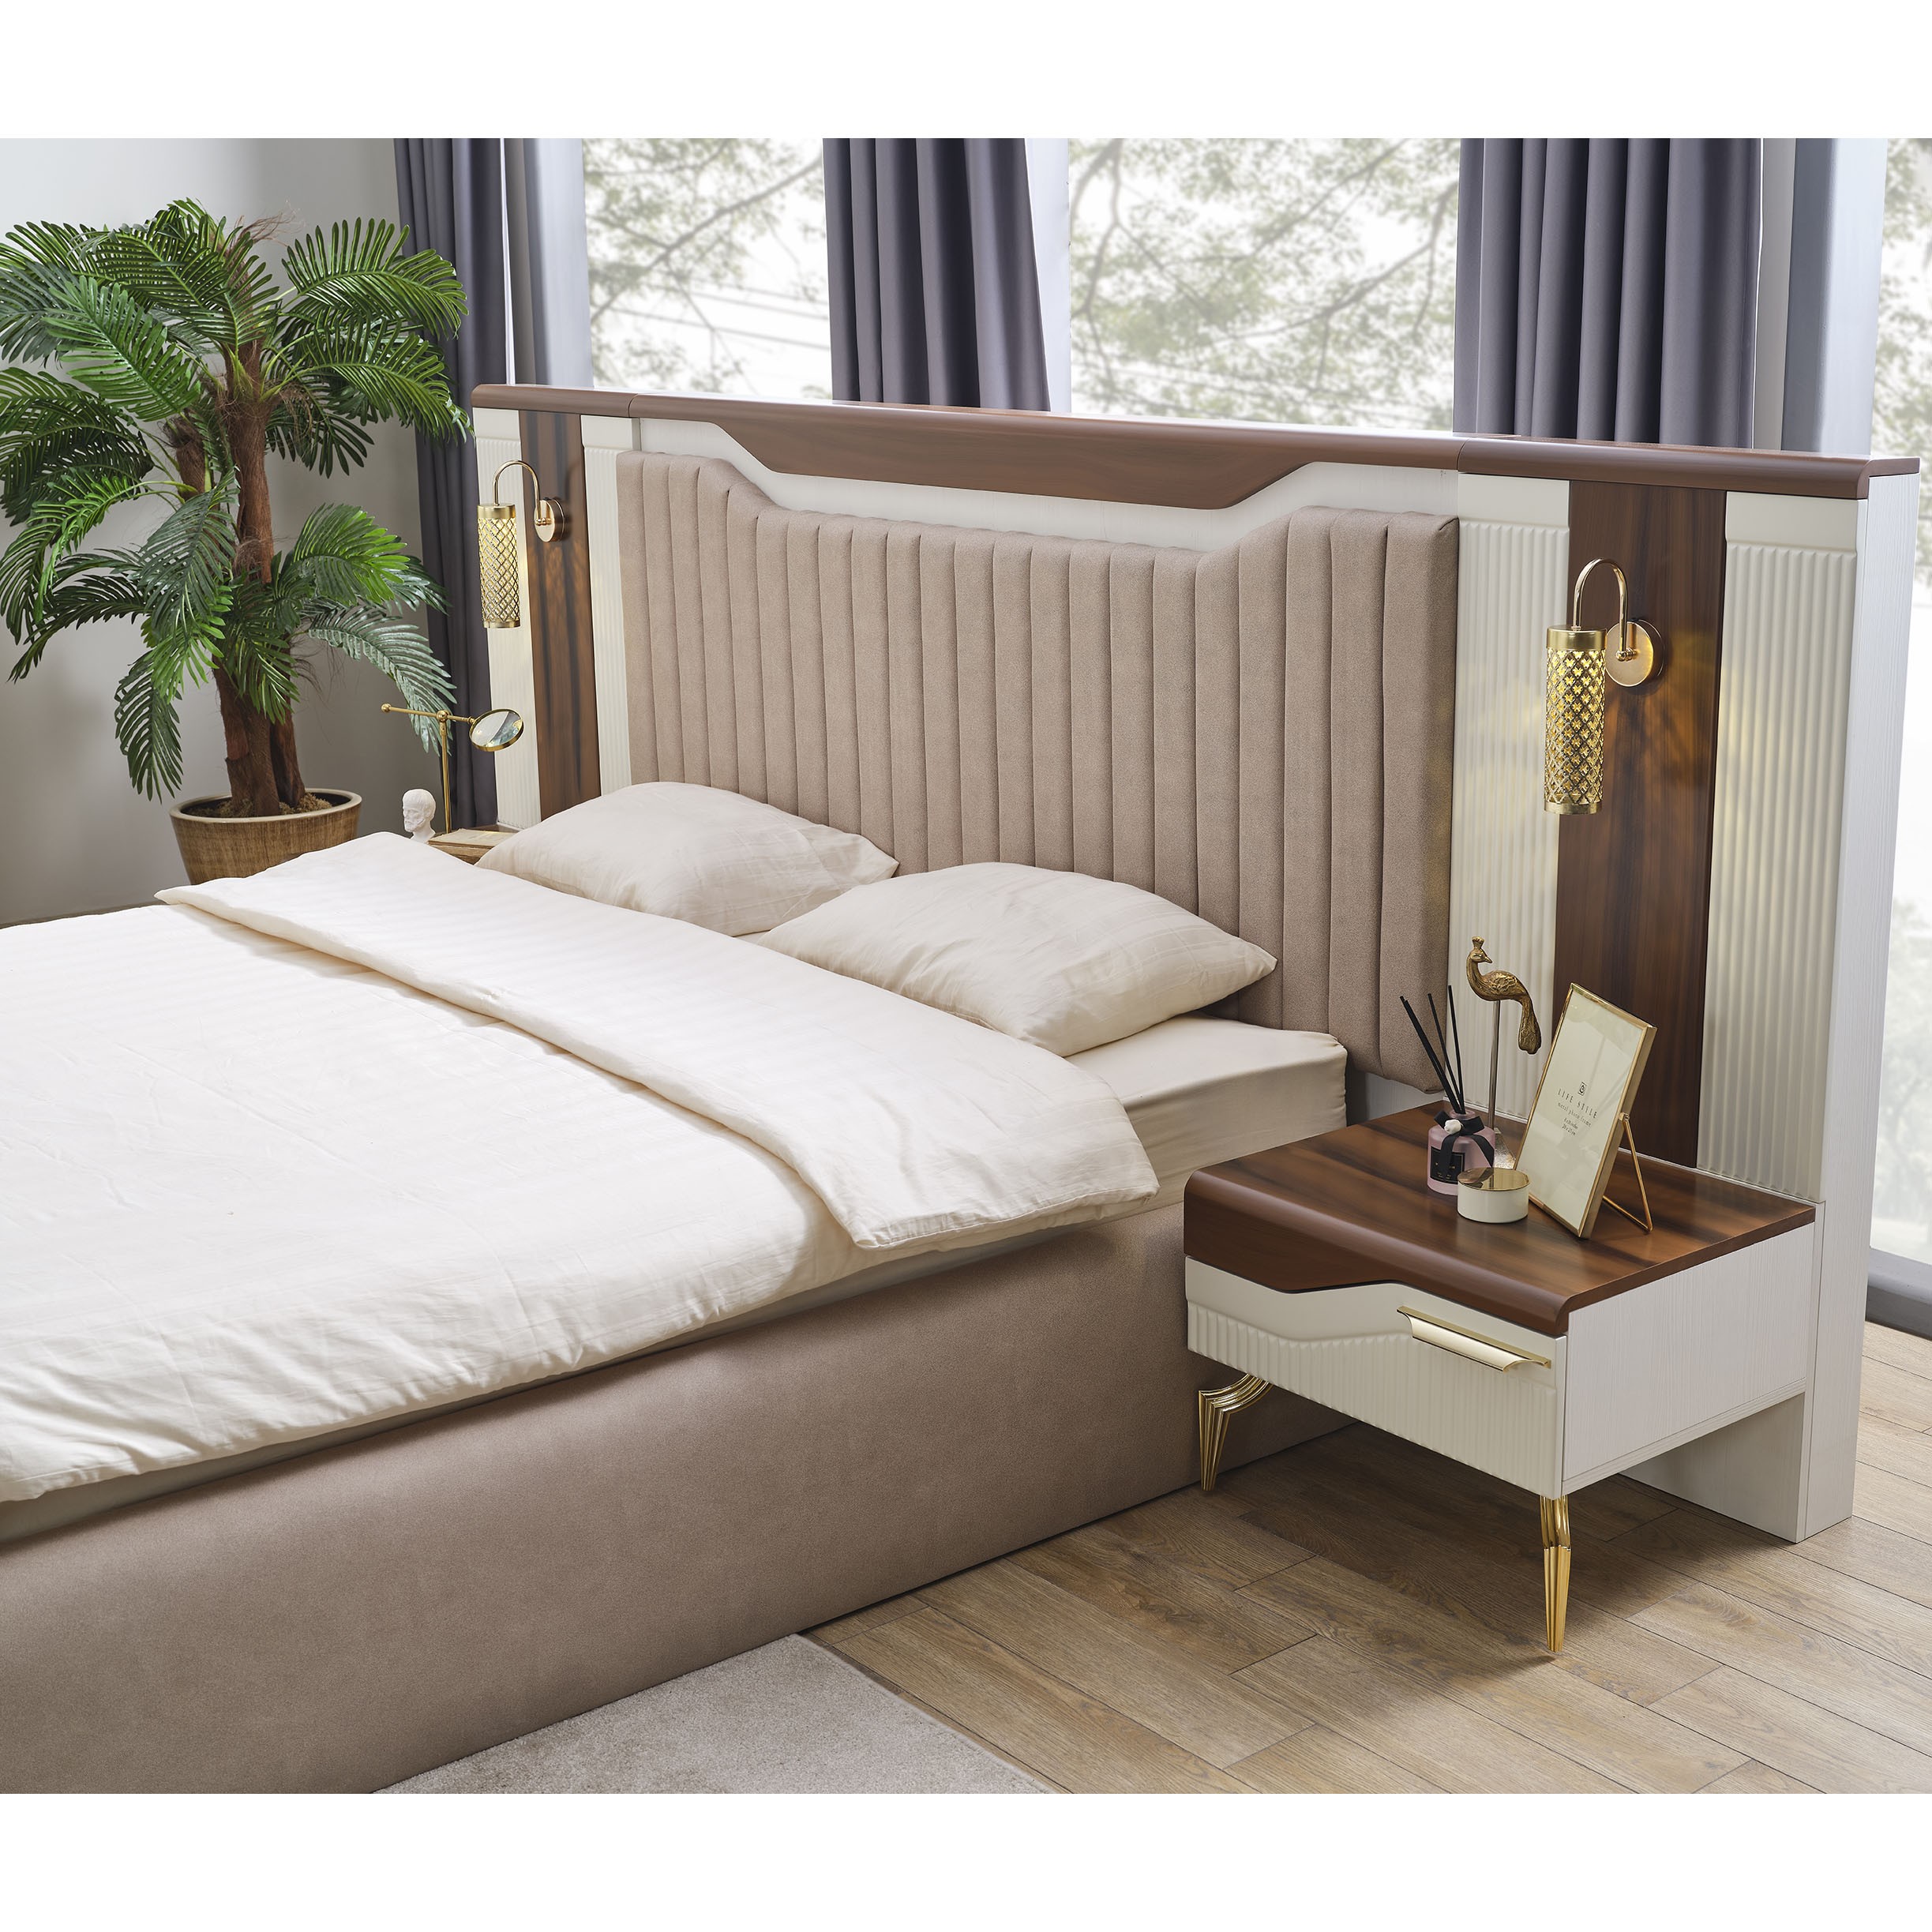 Style Hermes Vol1 Bed With Storage 180x200 cm